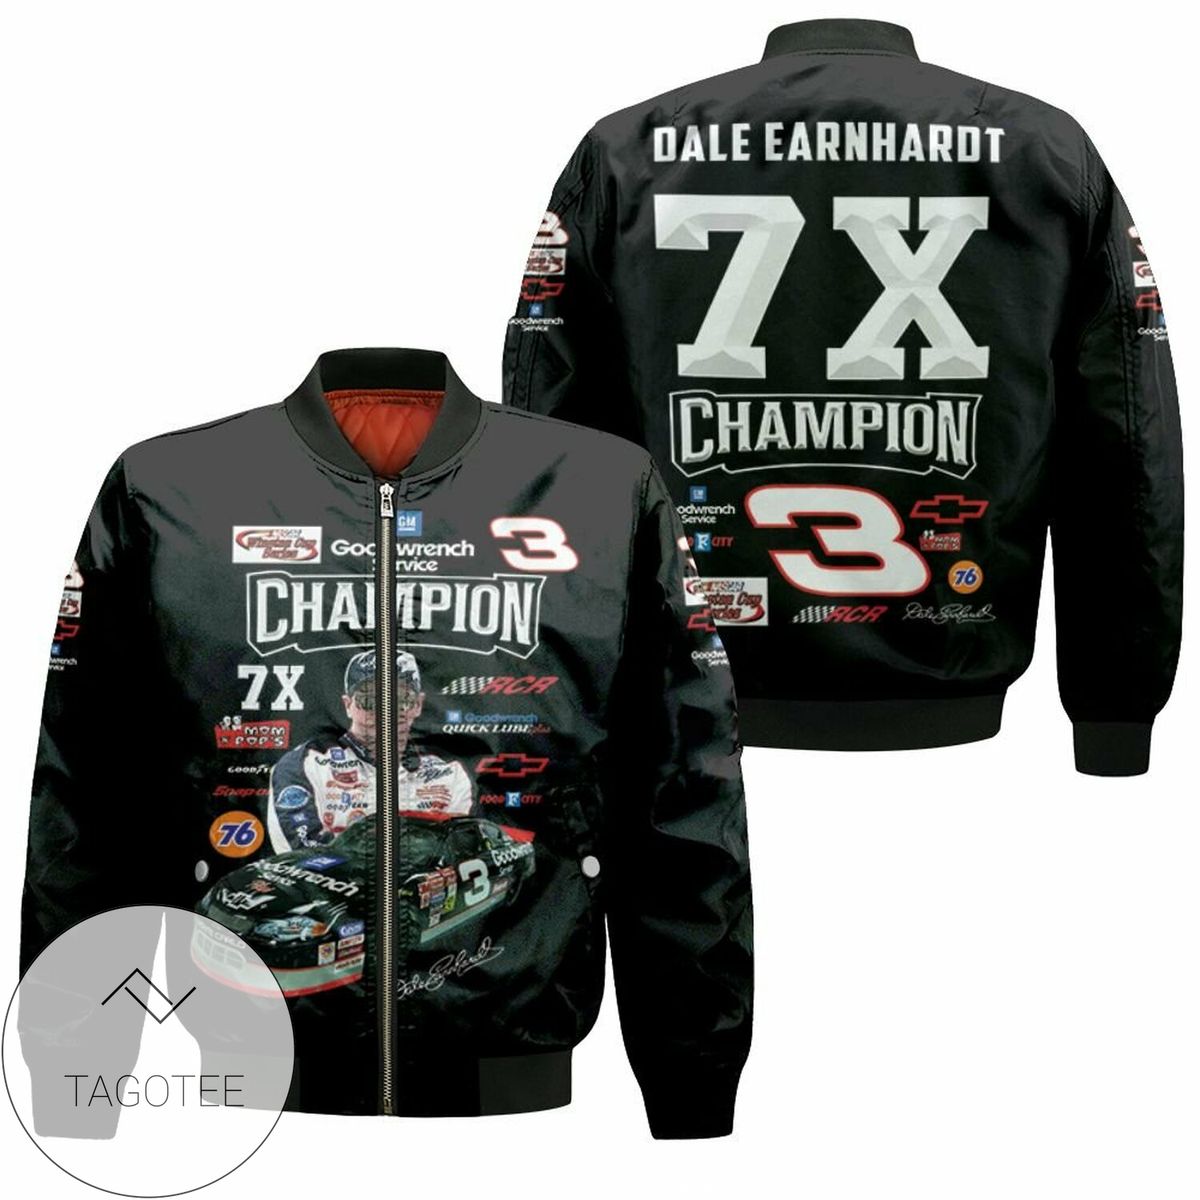 Dale Earnhardt Champion 7X Chevrolet Racing Car Signed For Fan 3D T Shirt Hoodie Sweater Jersey Bomber Jacket